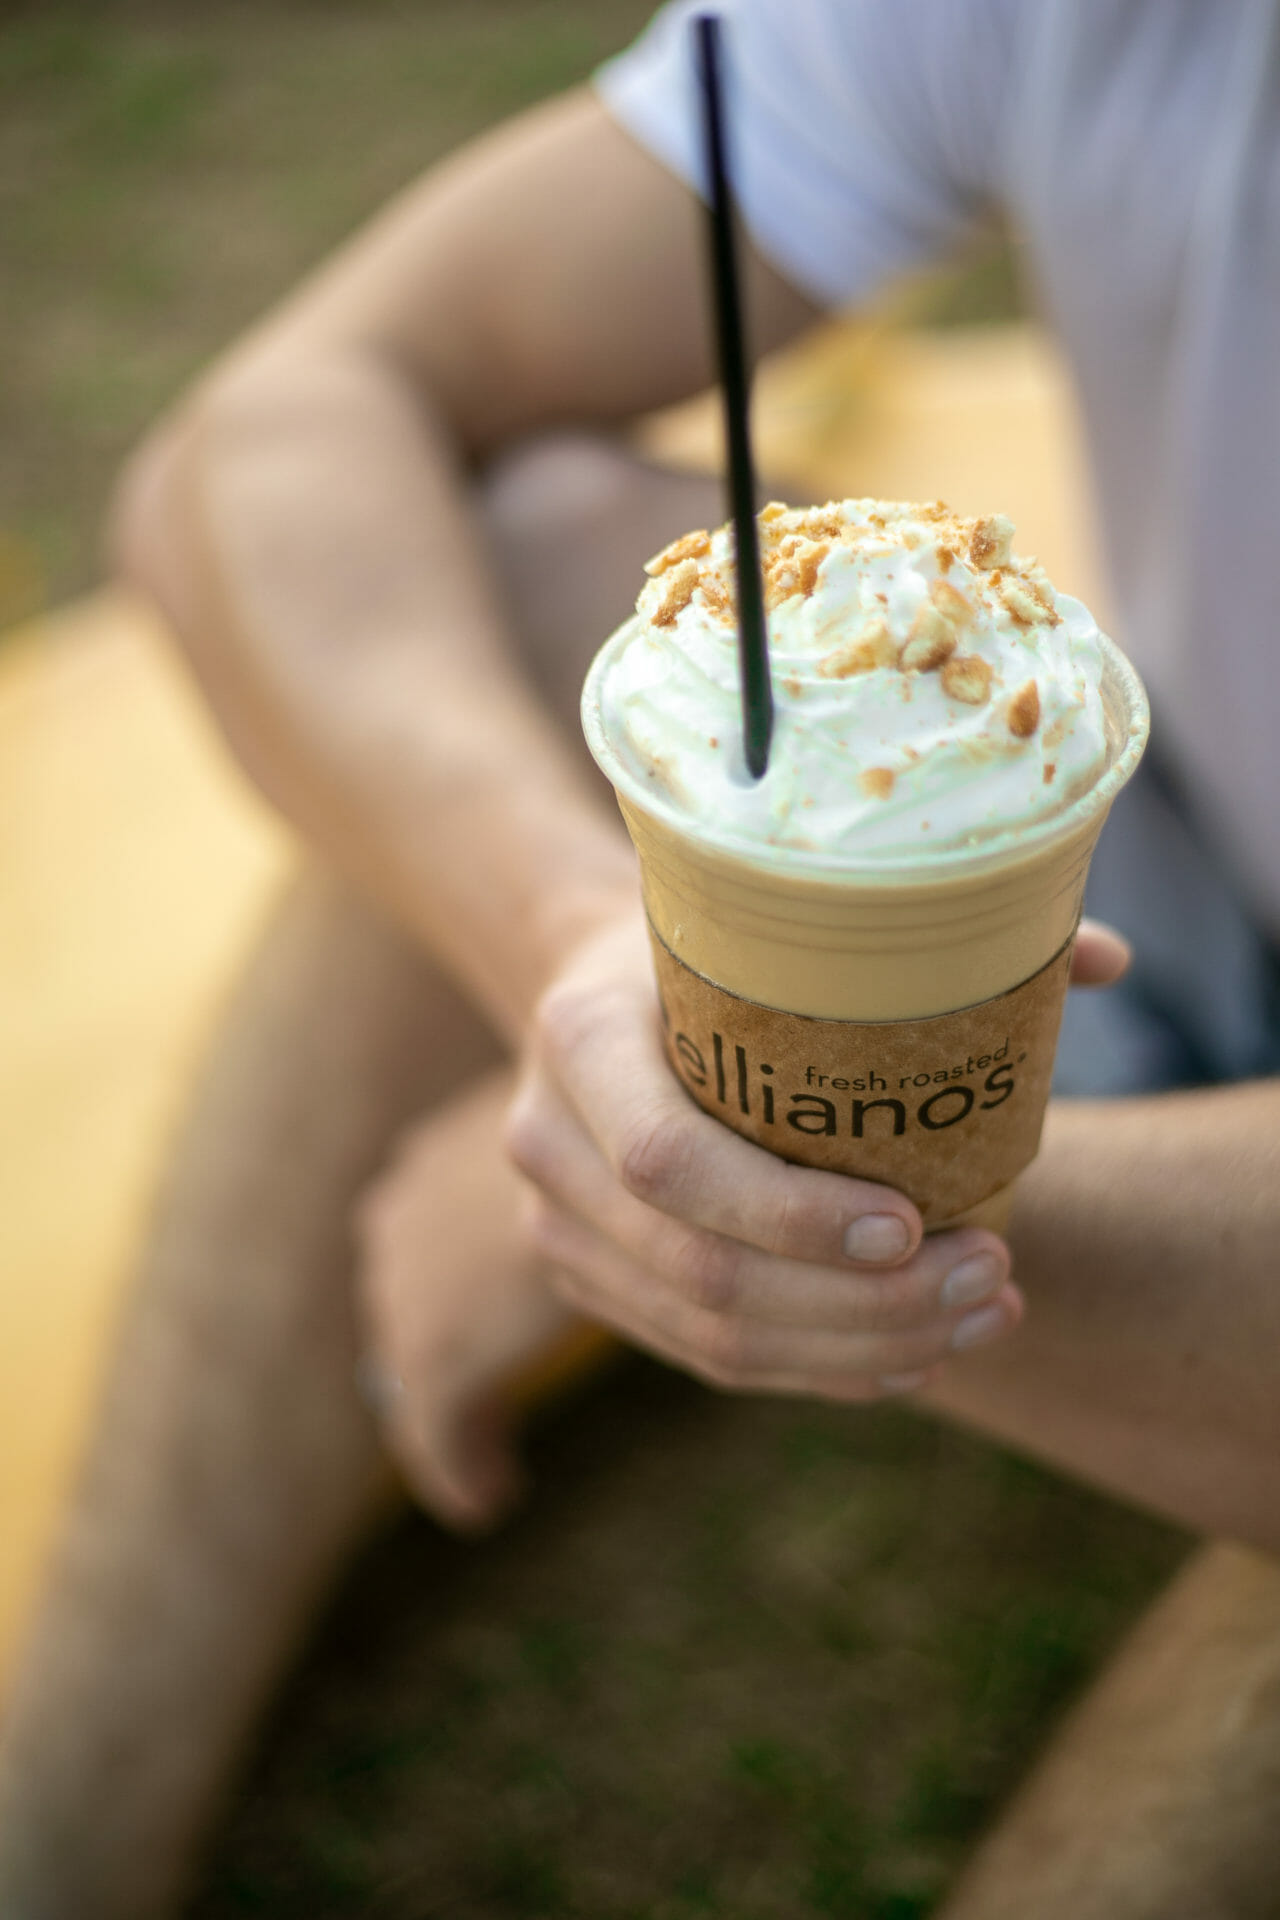 Ellianos Coffee is Celebrating the Spring Season with the Banana Pudding Freezer